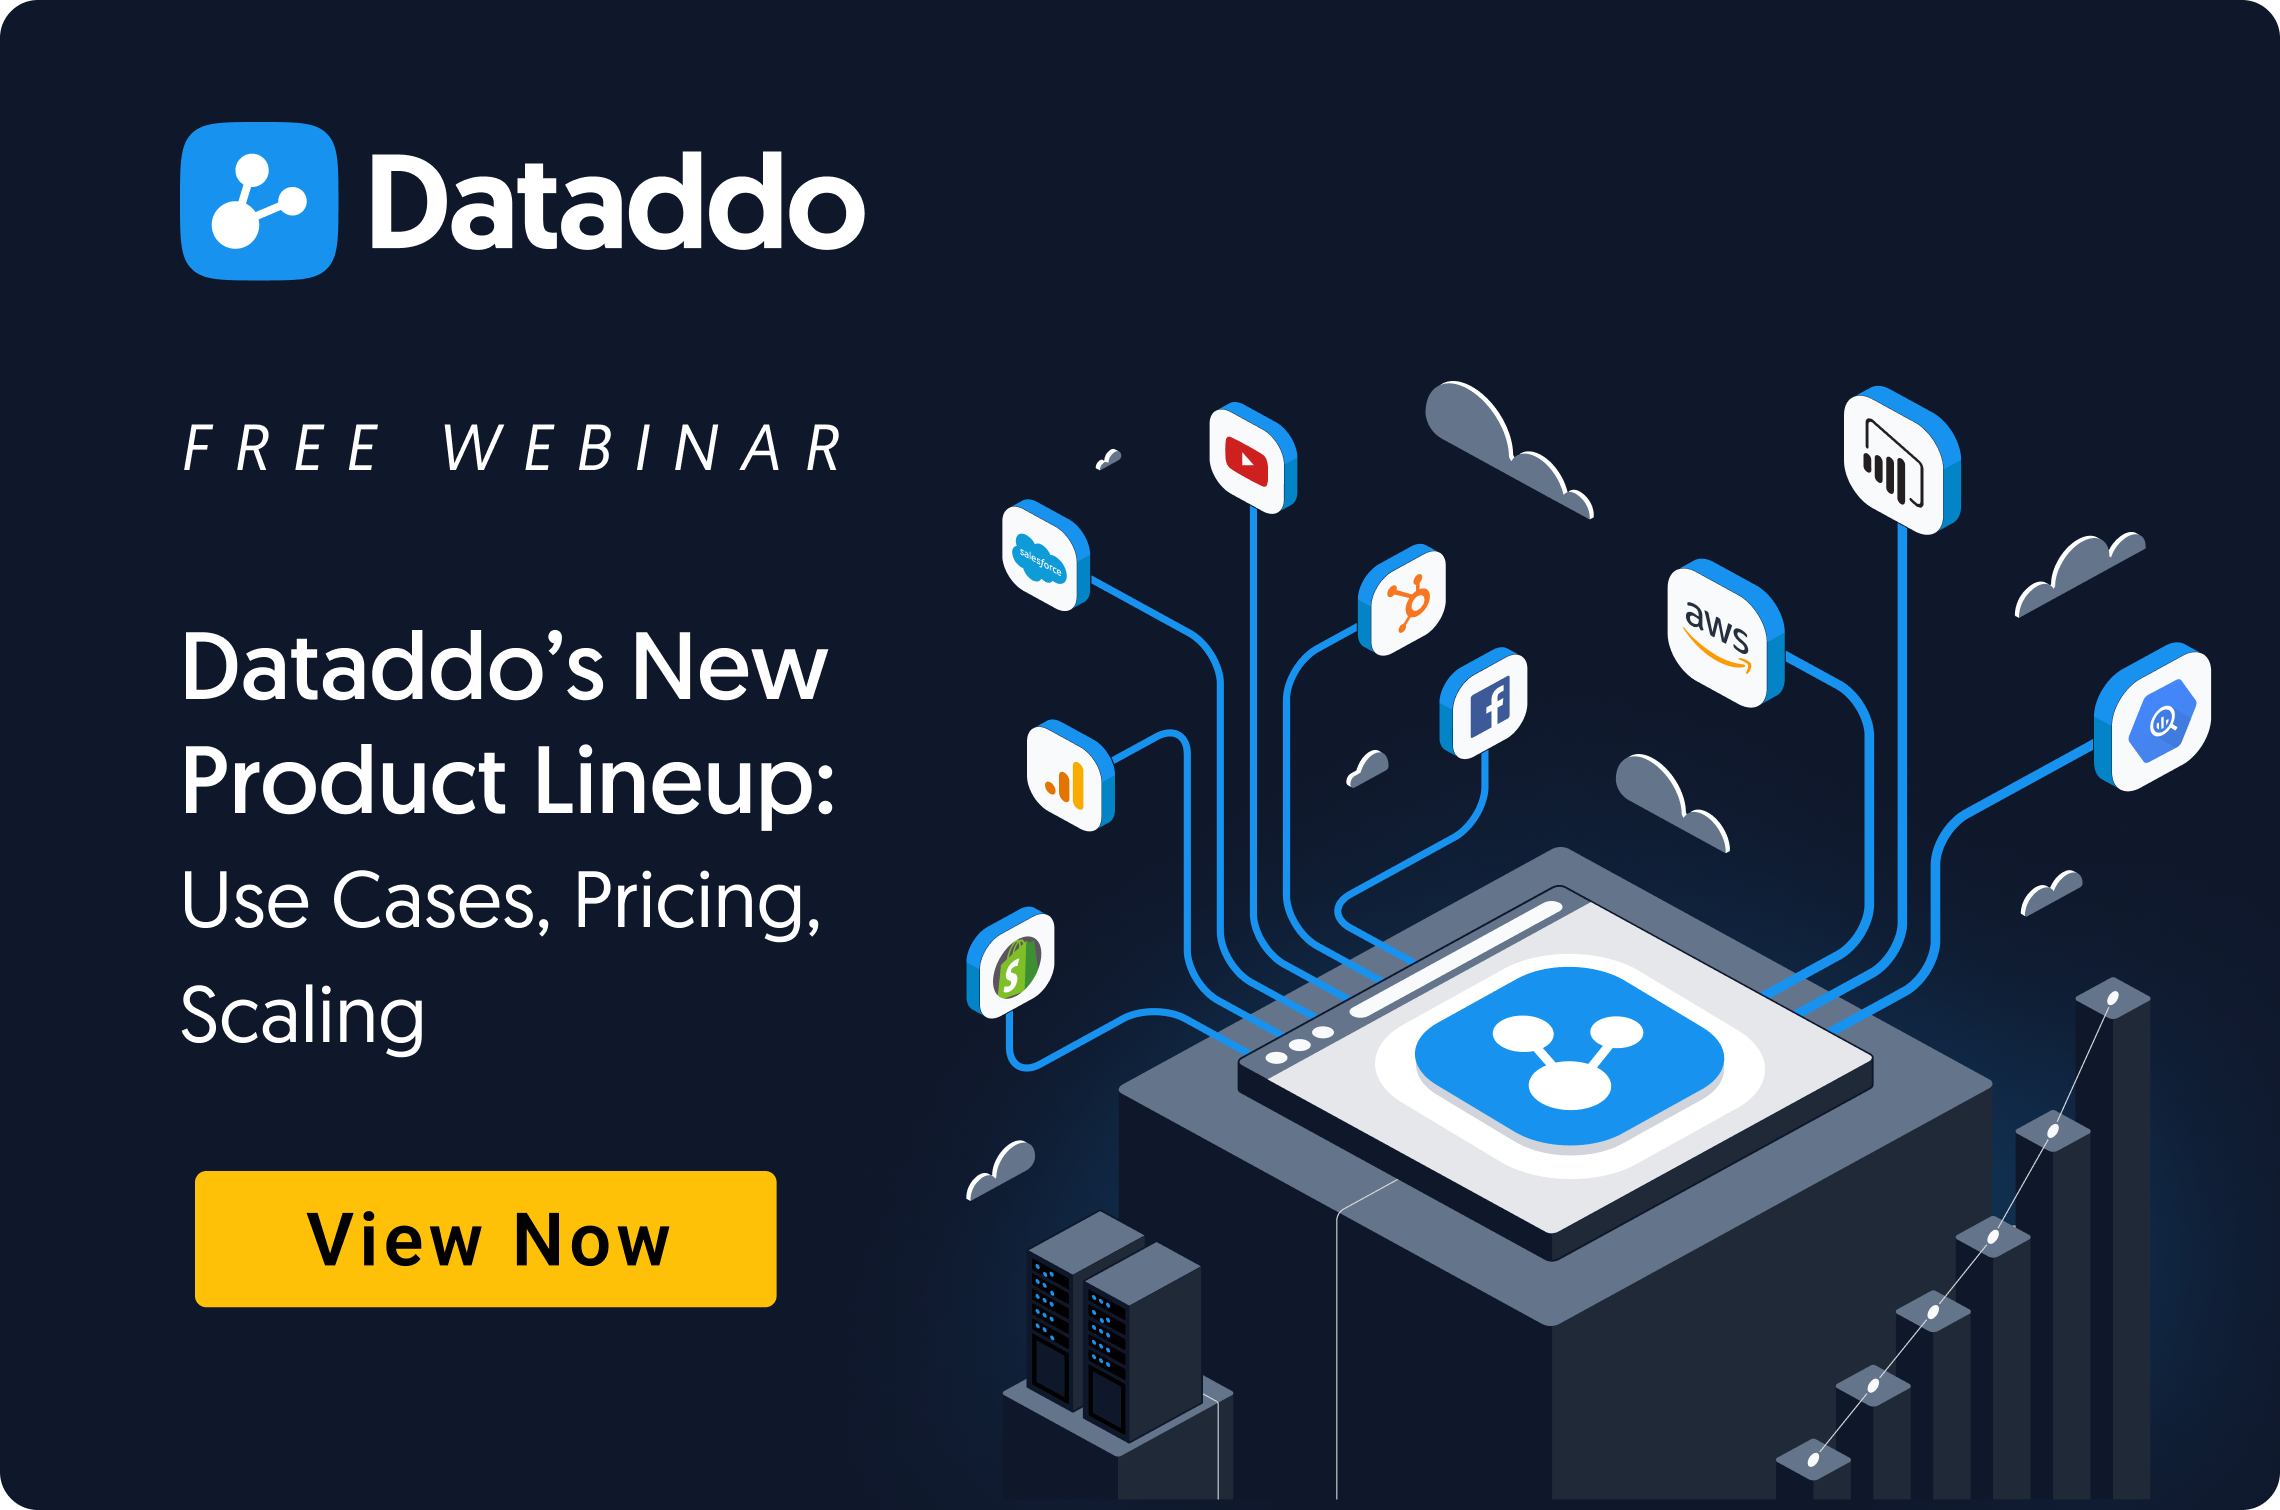 [VIDEO] Dataddo’s New Product Lineup: Use Cases, Pricing, Scaling